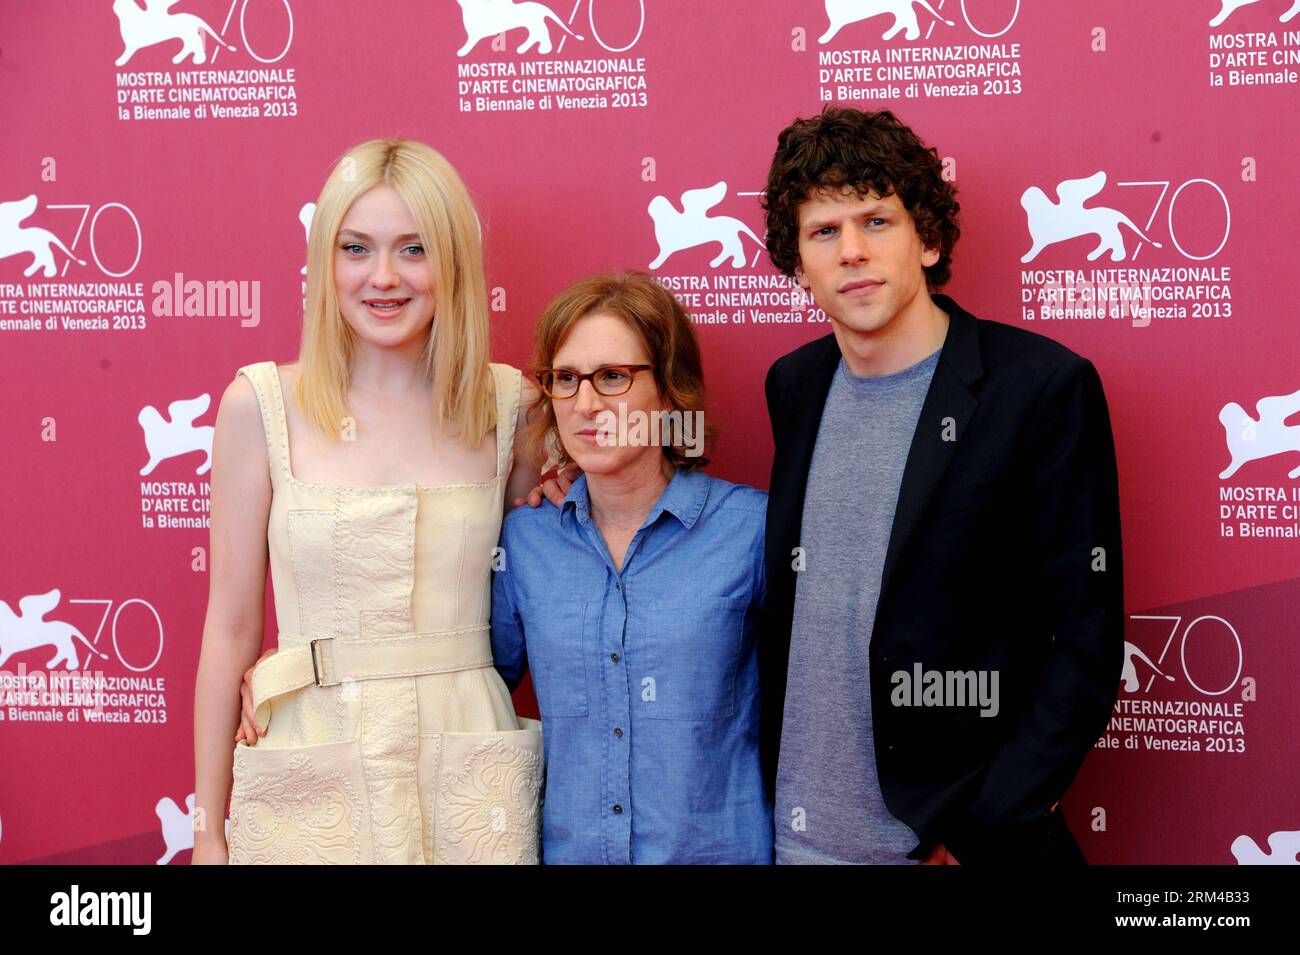 Bildnummer: 60417397  Datum: 31.08.2013  Copyright: imago/Xinhua (130831) -- VENICE, Aug. 31, 2013 (Xinhua) -- U.S. director Kelly Reichardt (C) , actor Jesse Isenberg (R) and actress Dakota Fanning pose for photos at the photocall of Night moves during the 70th Venice Film Festival, in Lido of Venice, Italy, on Aug. 31, 2013. (Xinhua/Xu Nizhi) ITALY-VENICE-FILM-FESTIVAL-PHOTOCALL PUBLICATIONxNOTxINxCHN Kultur Entertainment People Film 70 Internationale Filmfestspiele Venedig Photocall premiumd xsp x0x 2013 quer      60417397 Date 31 08 2013 Copyright Imago XINHUA  Venice Aug 31 2013 XINHUA U Stock Photo